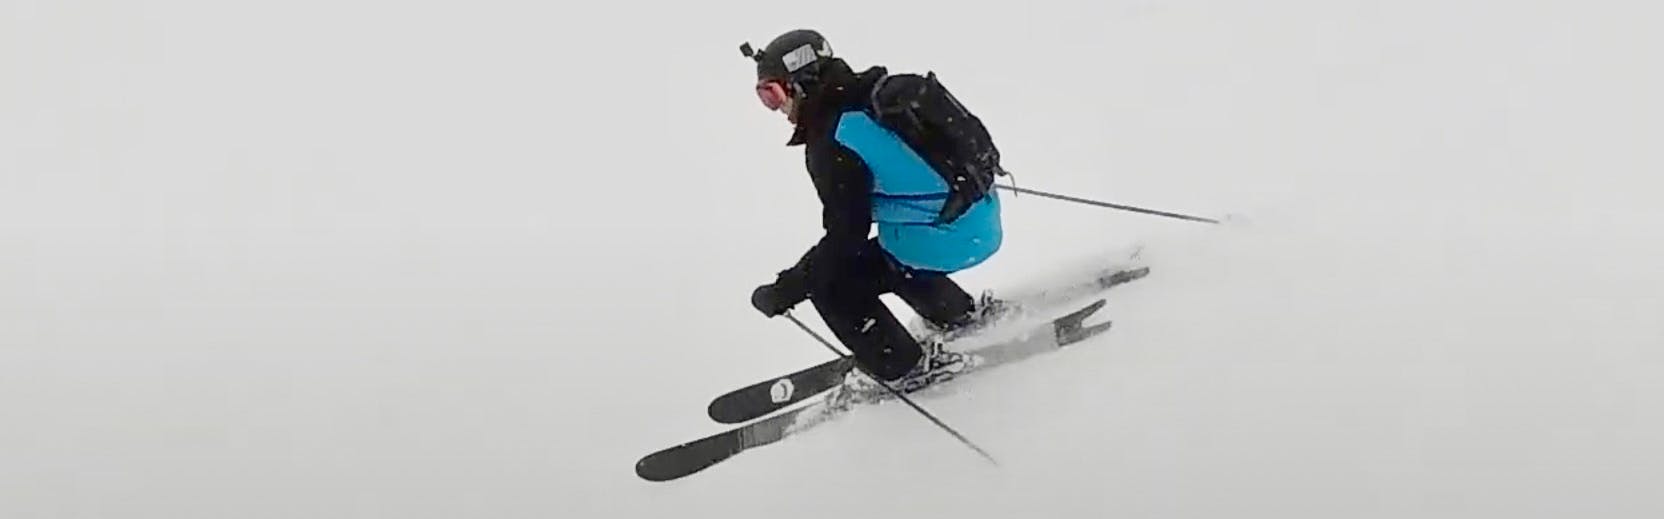 Curated expert Robbie M. skiing down a slope with Line Sakana skis